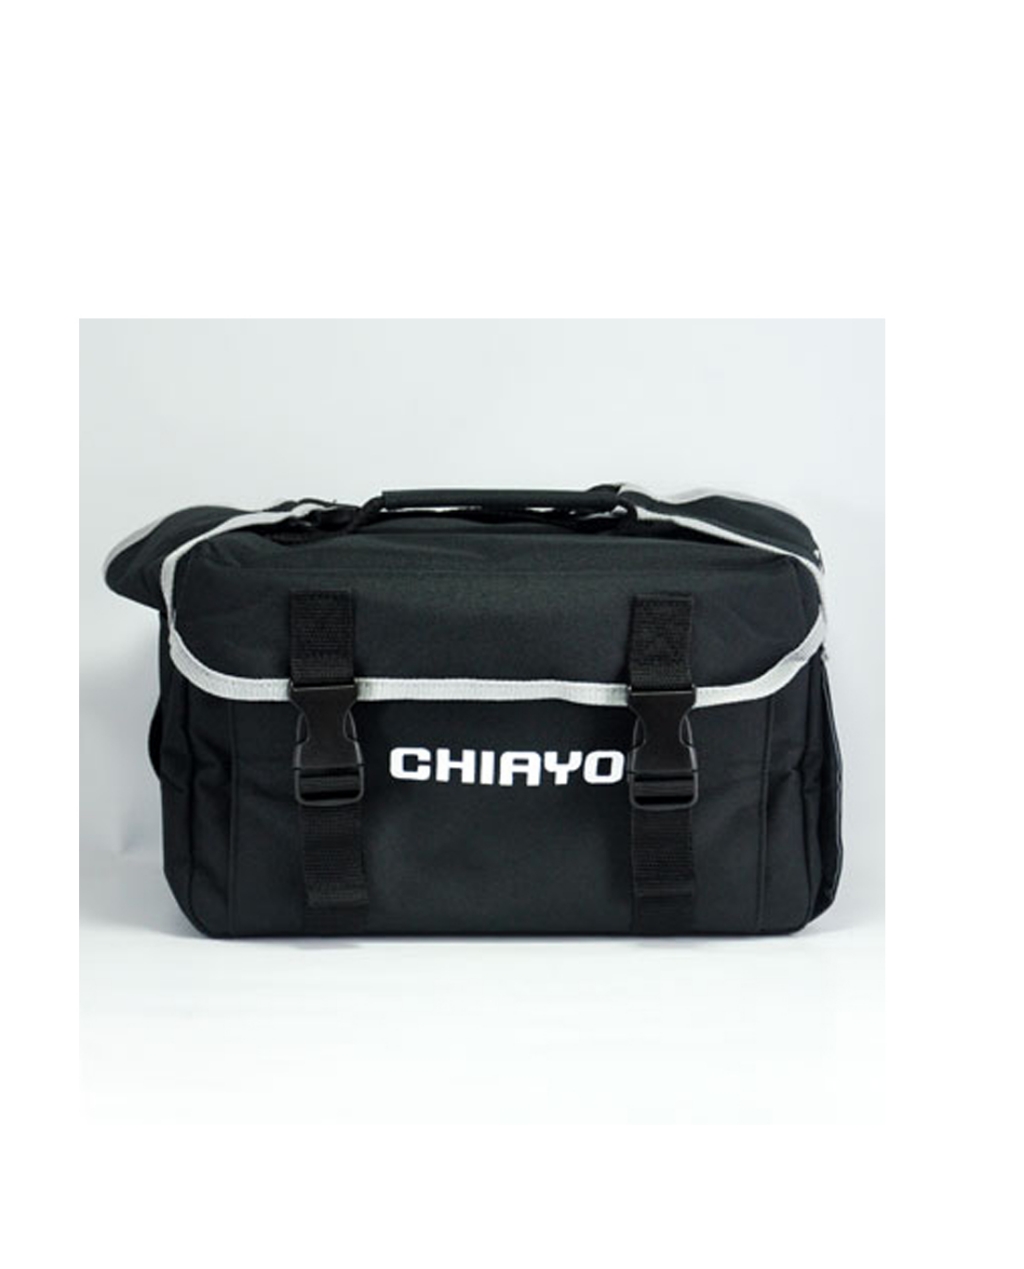 Carrying bag SB-41 for Coach Pro 500